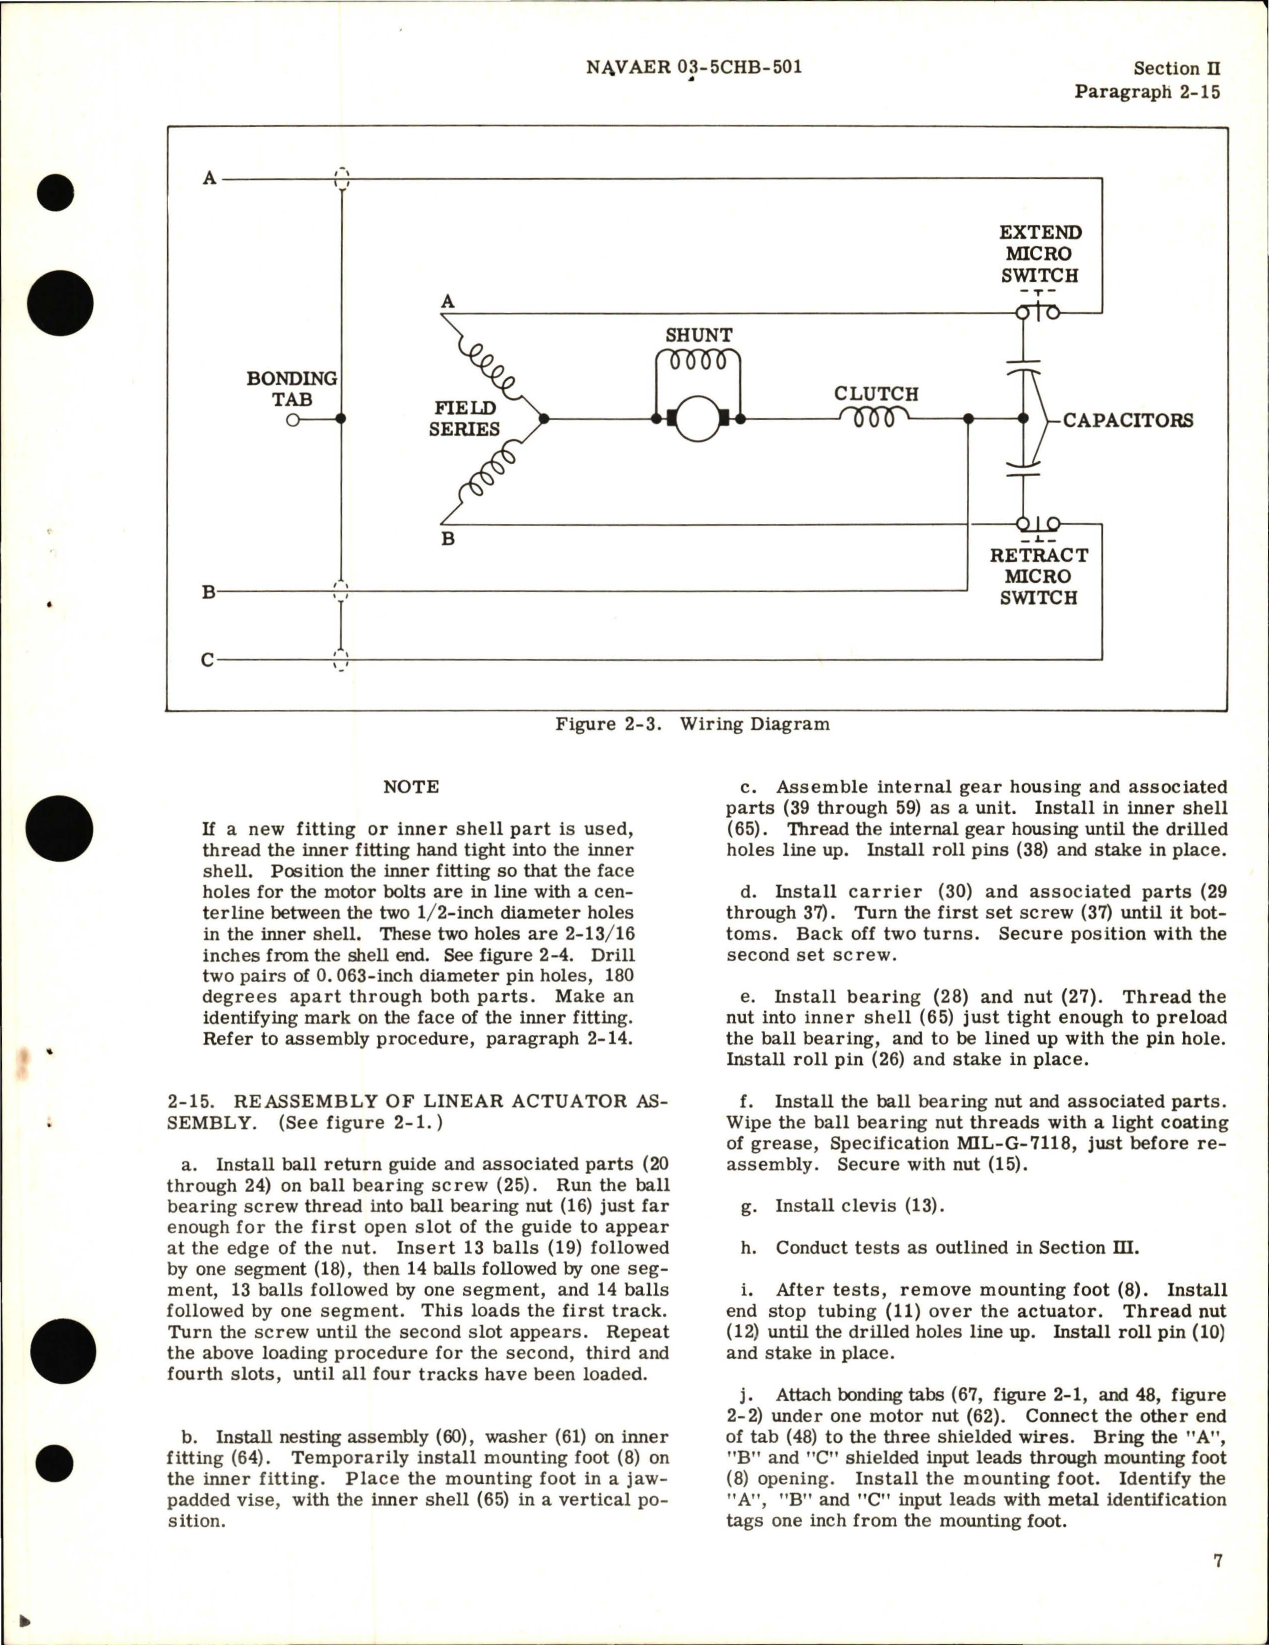 Sample page 5 from AirCorps Library document: Overhaul Instructions for Linear Actuator - Part R149